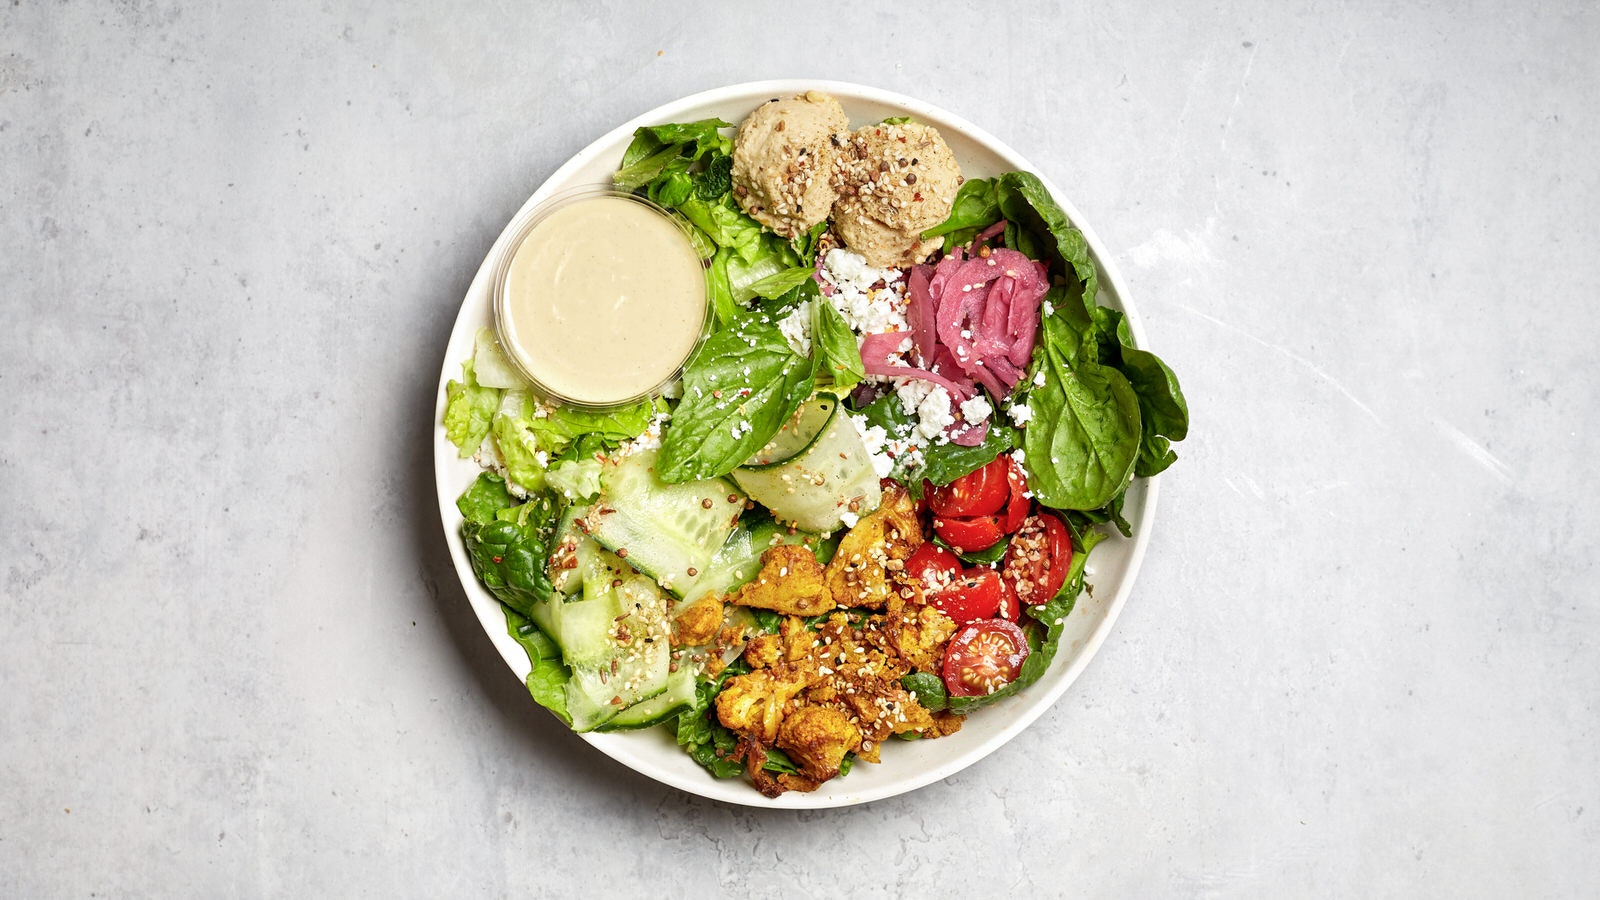 A vinbrant salad bowl with spinach, cucumber, feta, red onion, cherry tomatoes, cauliflower, hummus, dukkah and tahini yoghurt dressing from Atis in Shoreditch